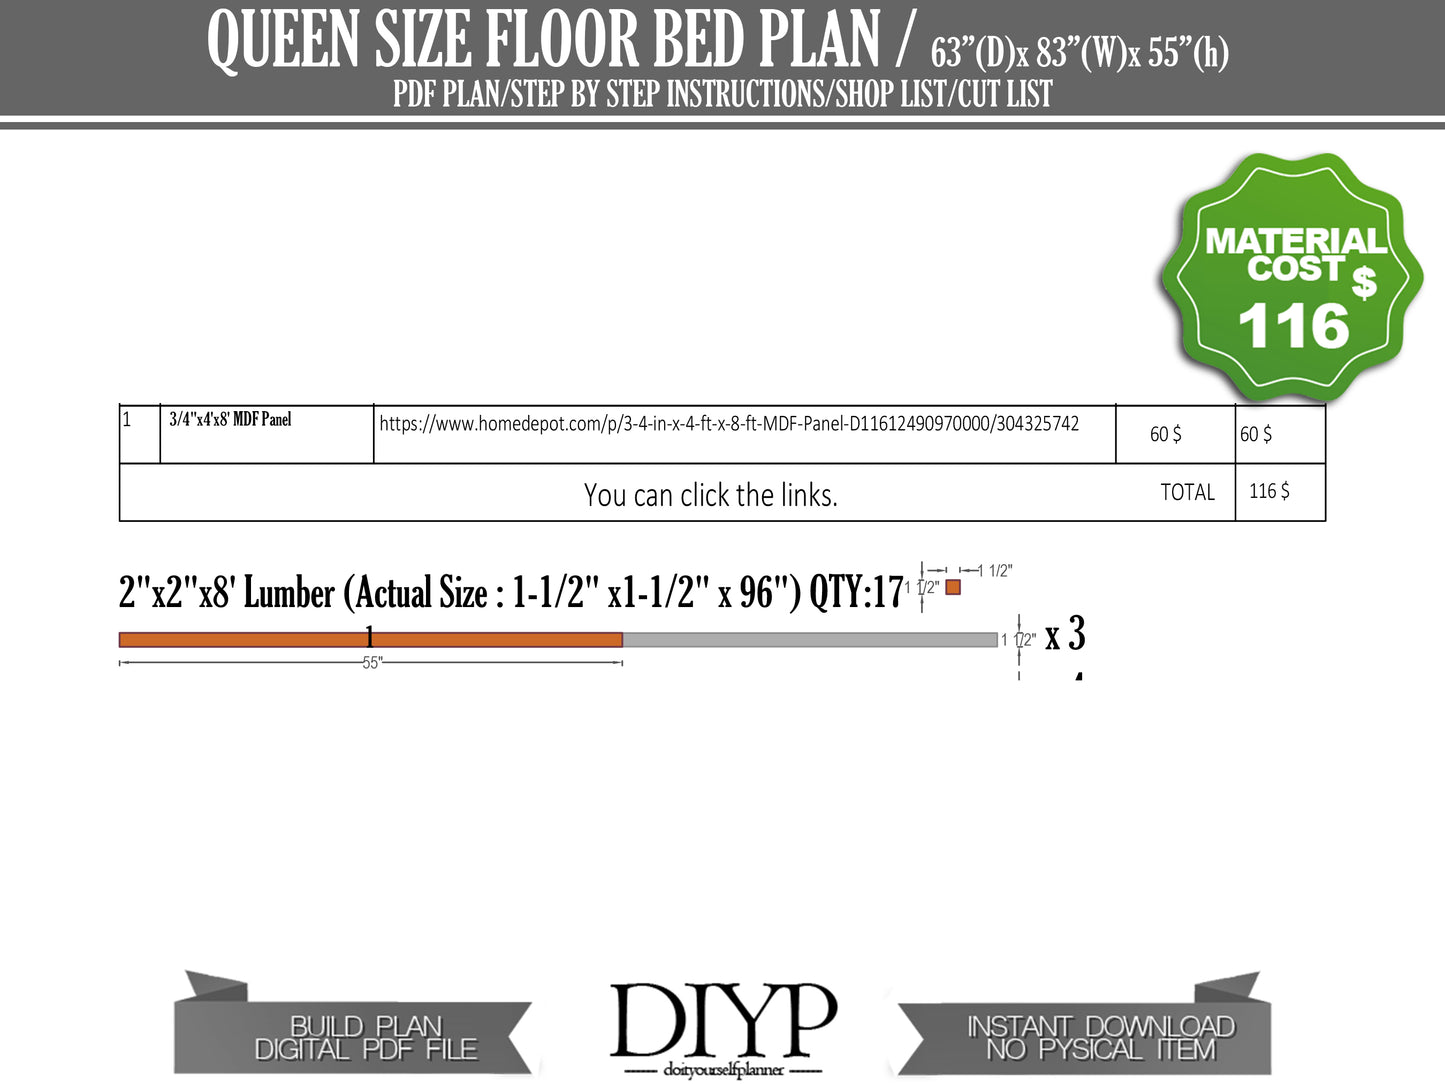 Create Your Dream Queen Size Floor Bed with Our Comprehensive DIY Frame Plan | Step-by-Step Build Animation Included!